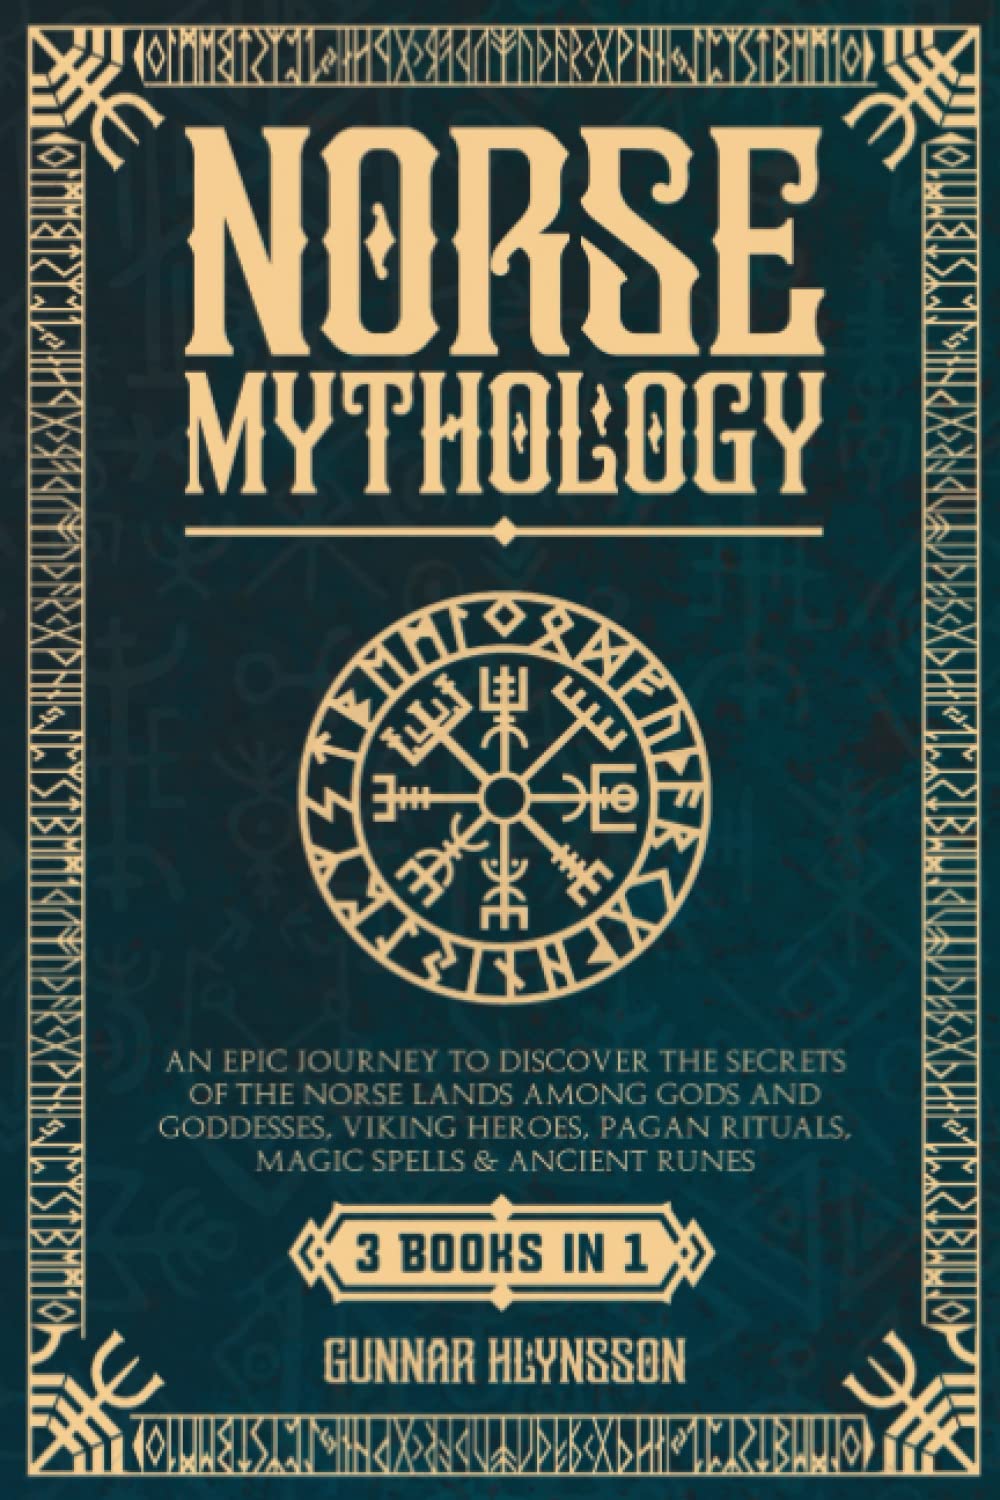 Norse Mythology: 3 in 1: An Epic Journey to Discover the Secrets of the Norse Lands Among Gods and Goddesses, Viking Heroes, Pagan Rituals, Magic Spells & Ancient Runes